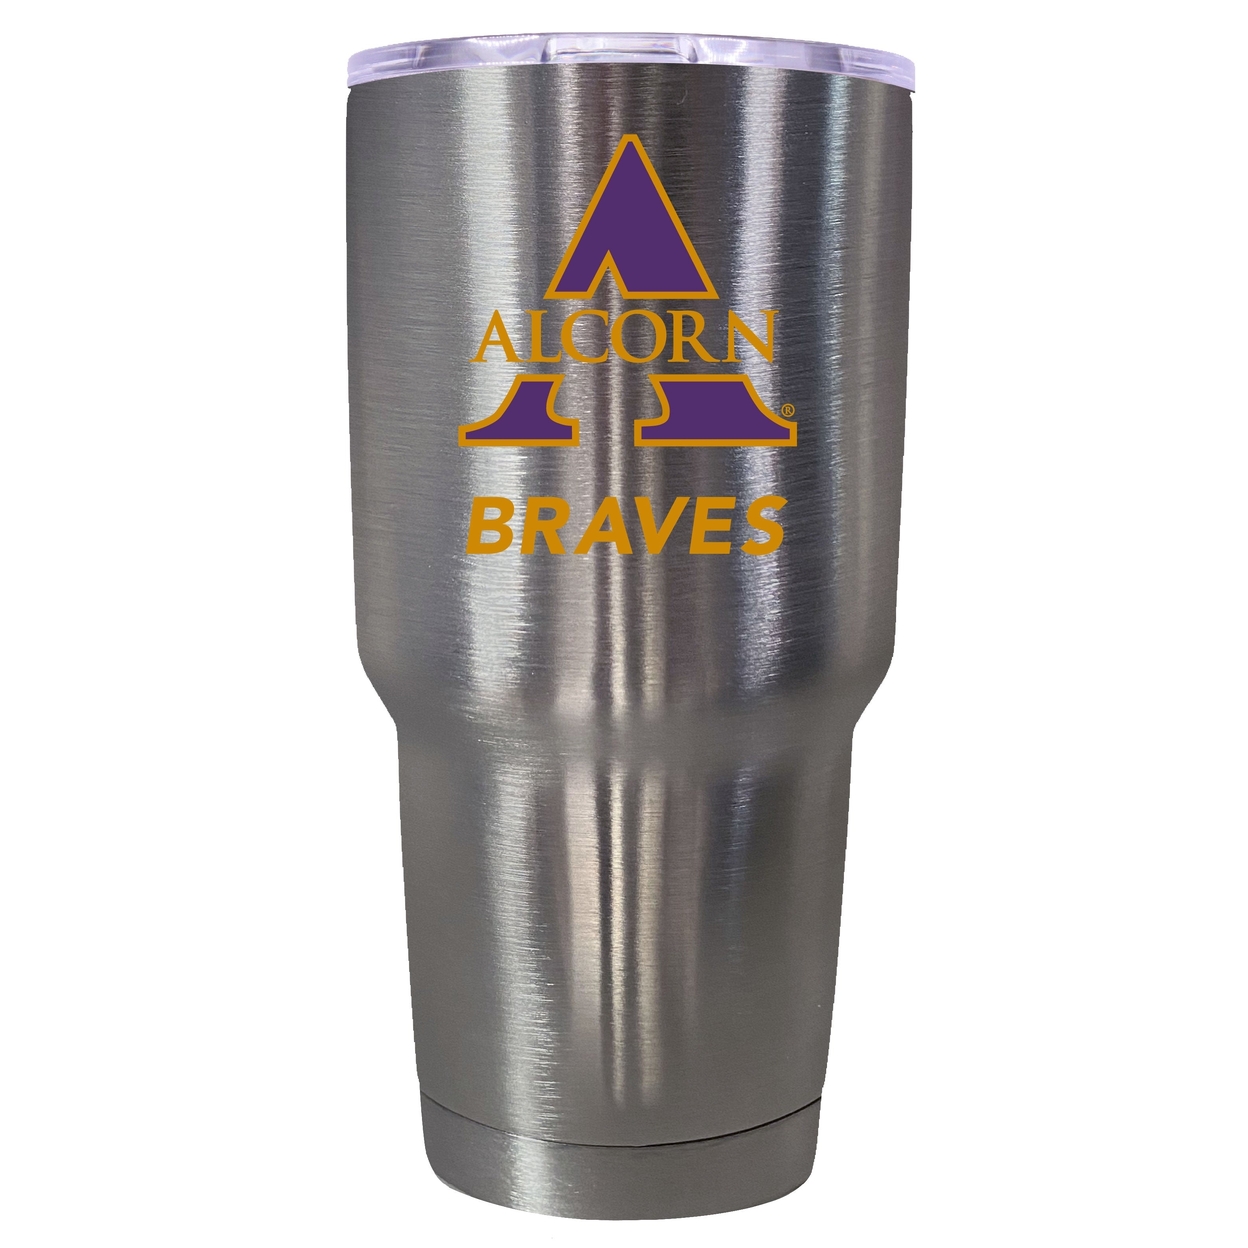 Alcorn State Braves 24 Oz Insulated Stainless Steel Tumbler